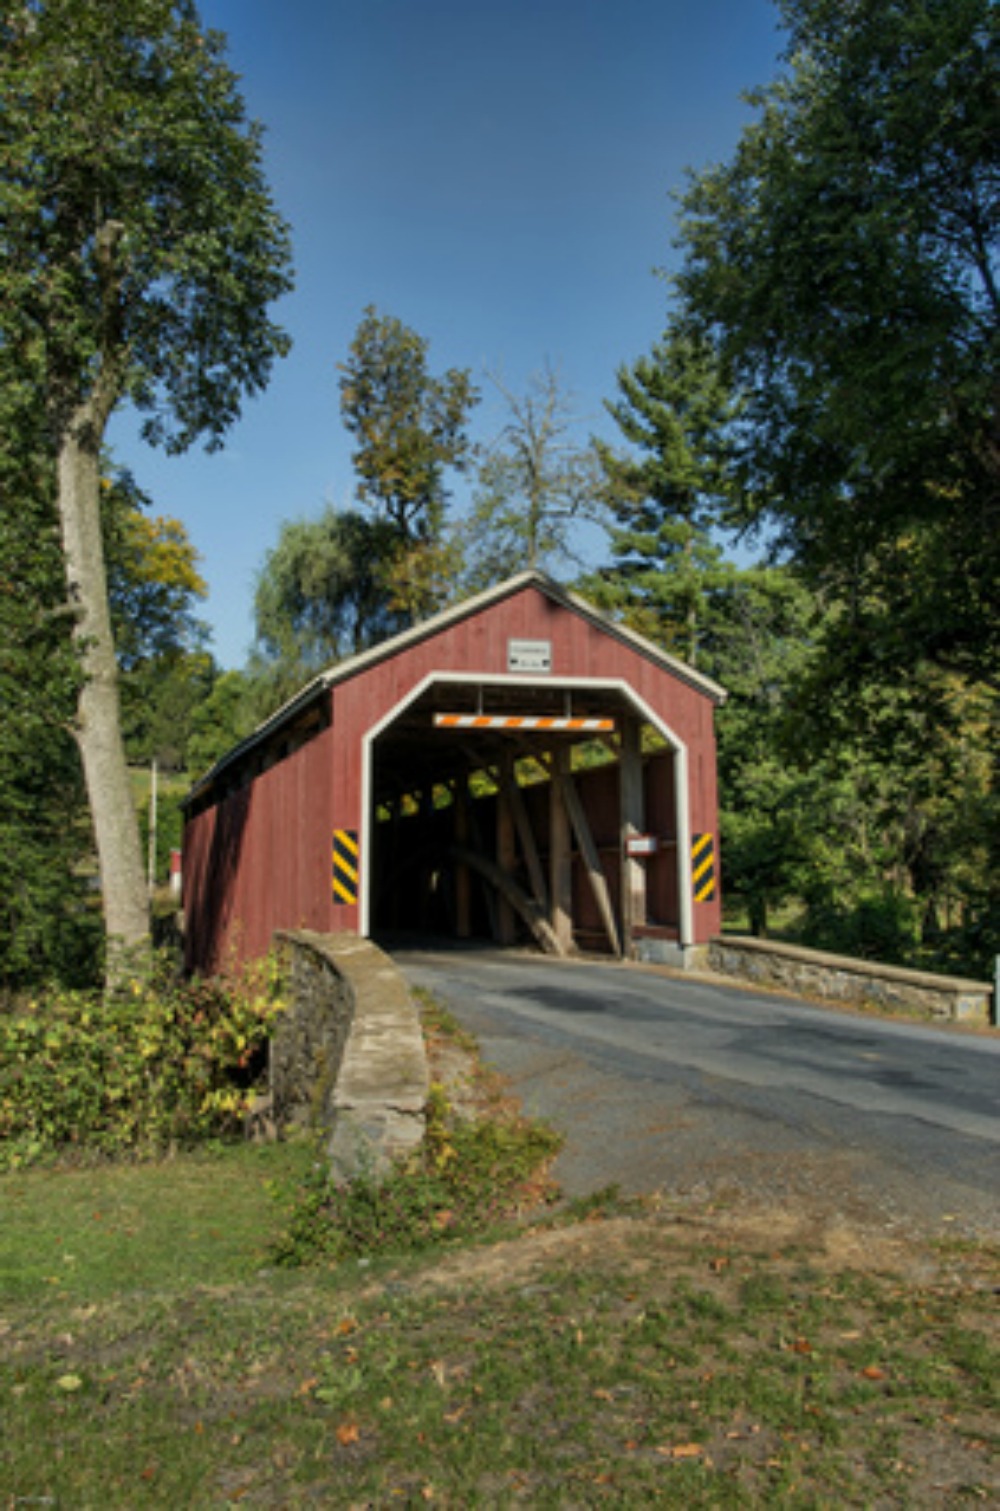 A red wooden covered bridge, on the road to Damascus.